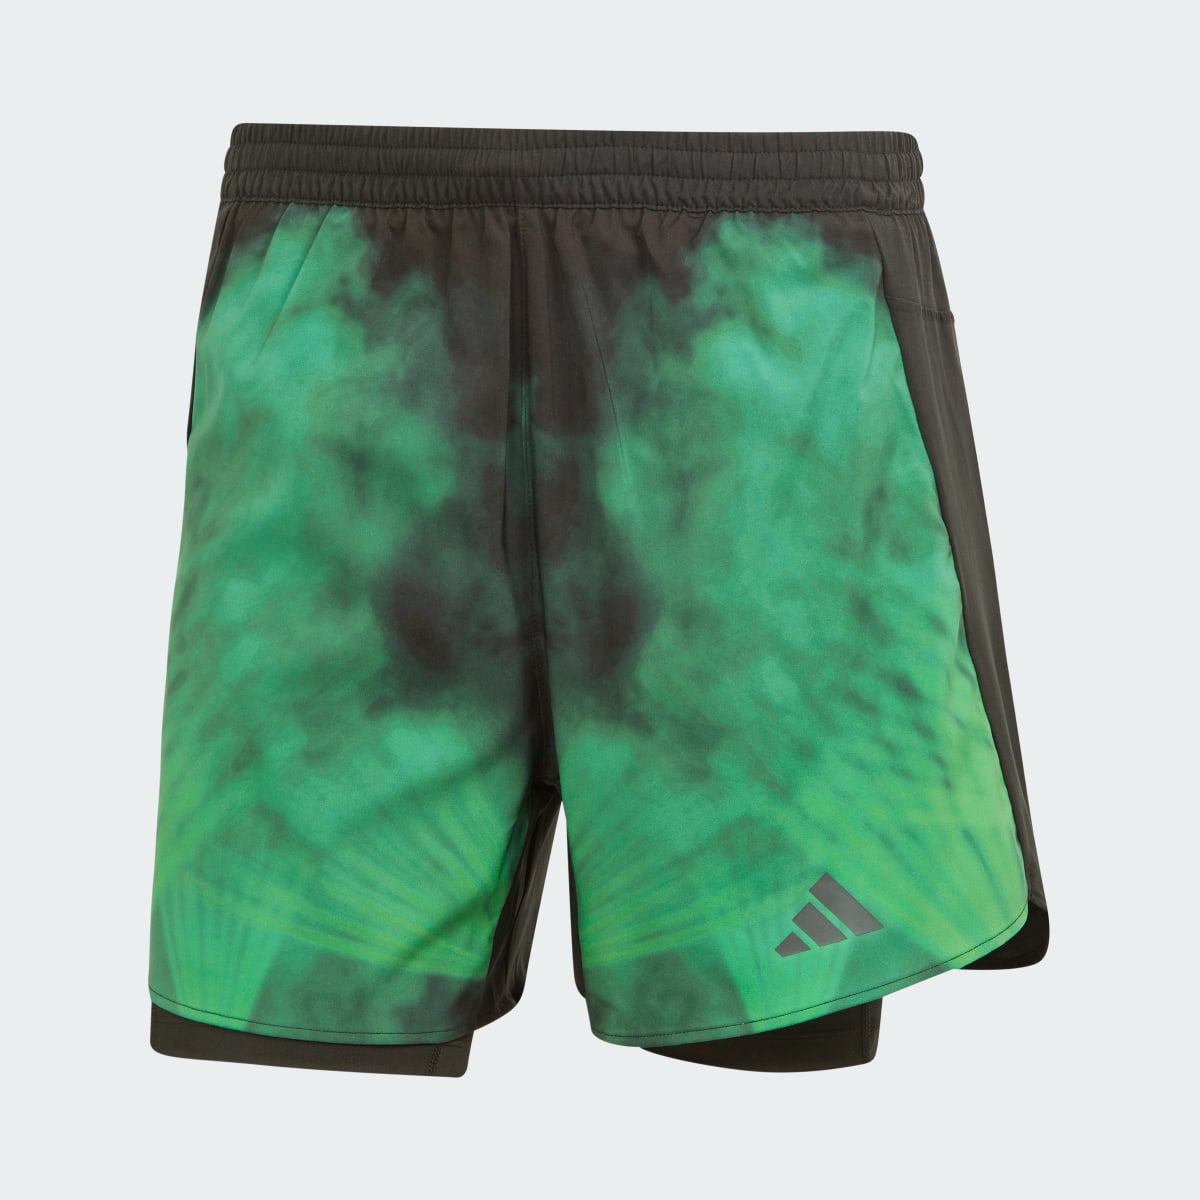 Adidas Berlin Running Two-in-One Shorts. 4